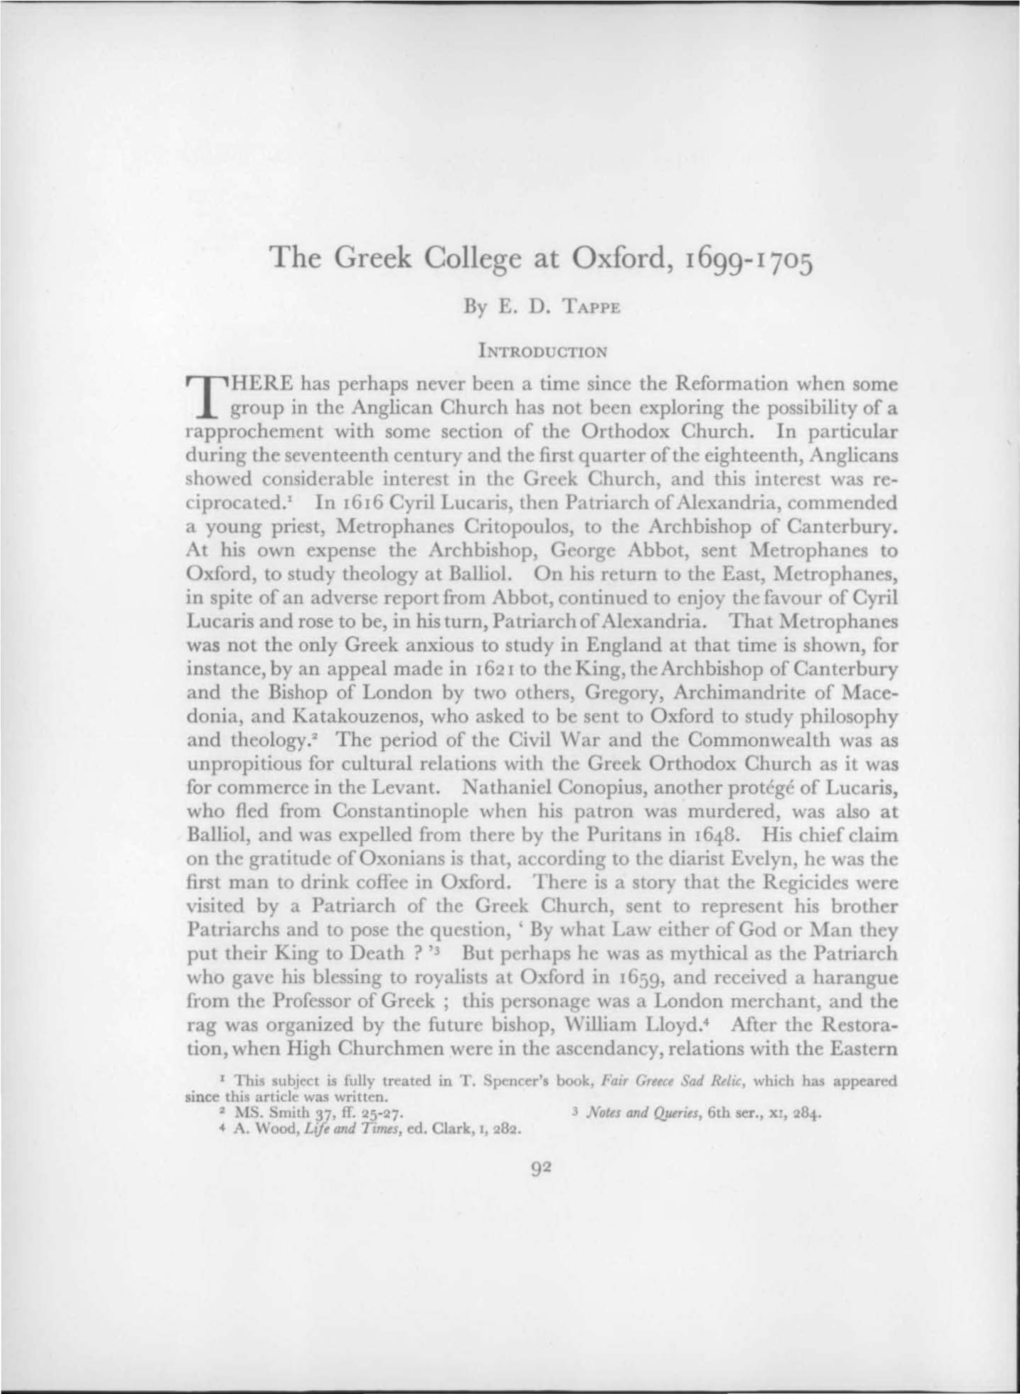 The Greek College at Oxford, 1699-1705